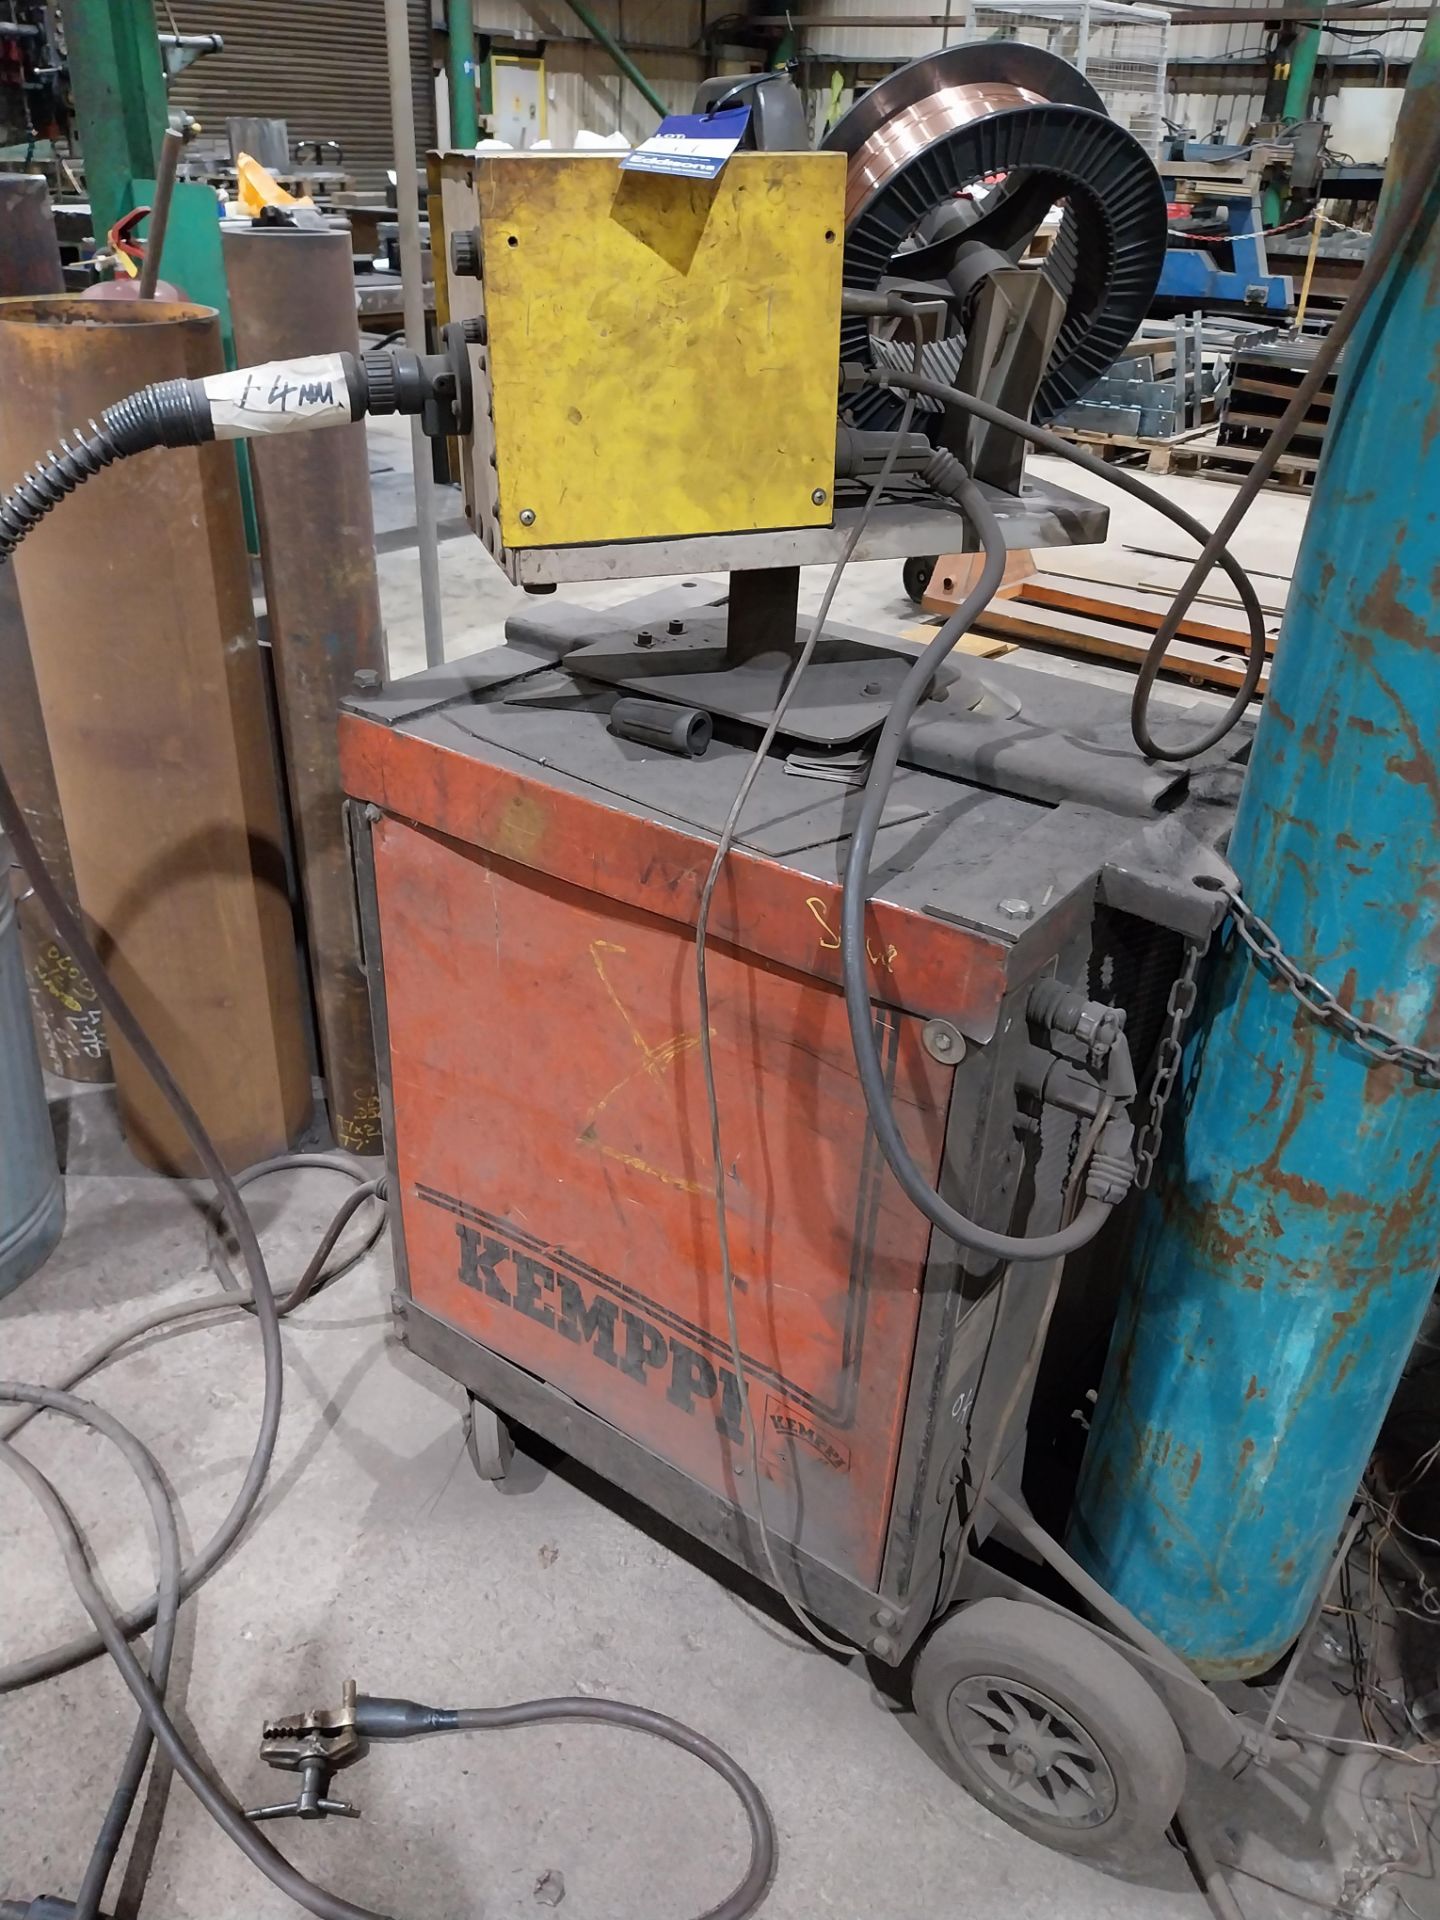 Kempp RA450 mig welder with F40 wire feed, torch and clamp (bottle not included) - Image 7 of 7